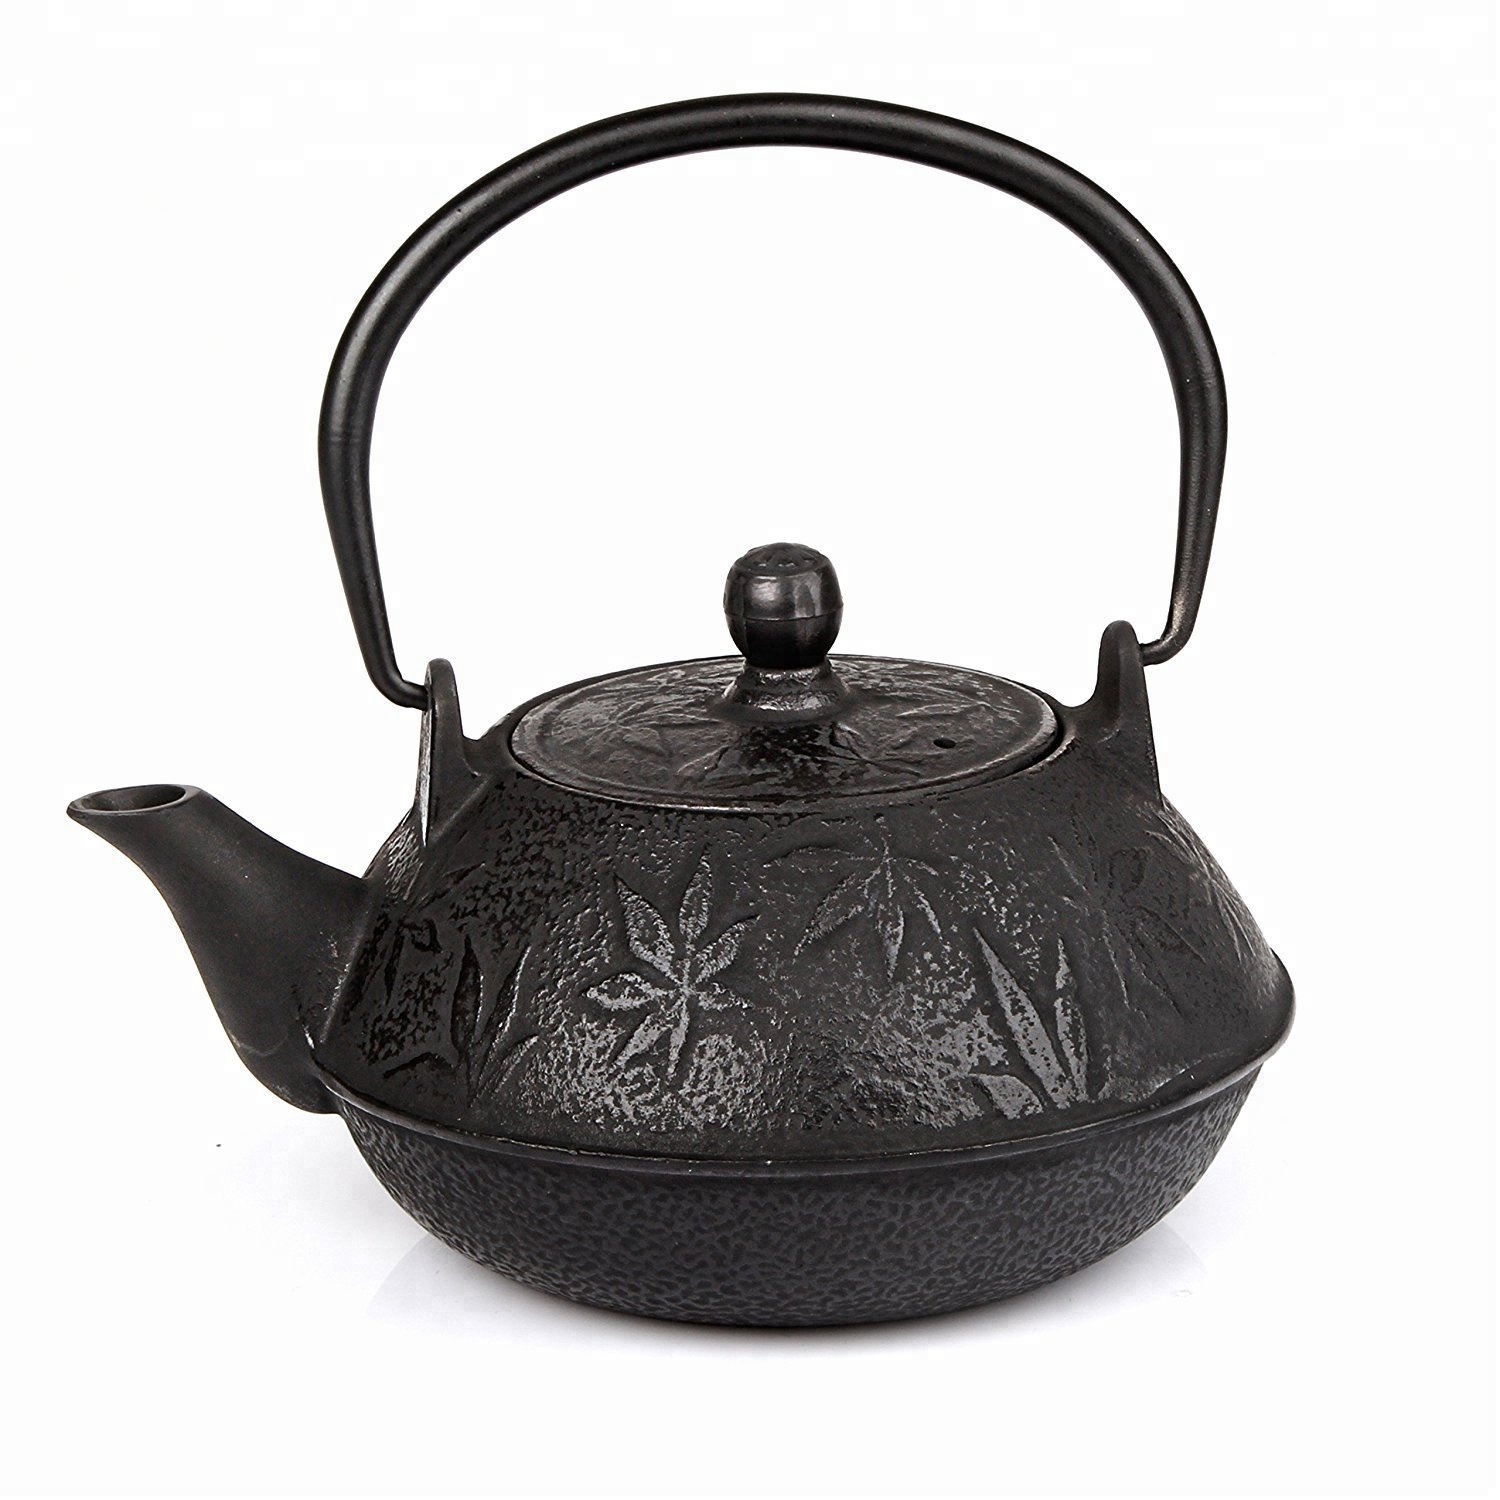 OEM Manufacturer High-Capacity Black Teapot -
 bamboo shape cast iron kattles, from Alibaba 13 yeas gold supplier with wholesaler price – KASITE